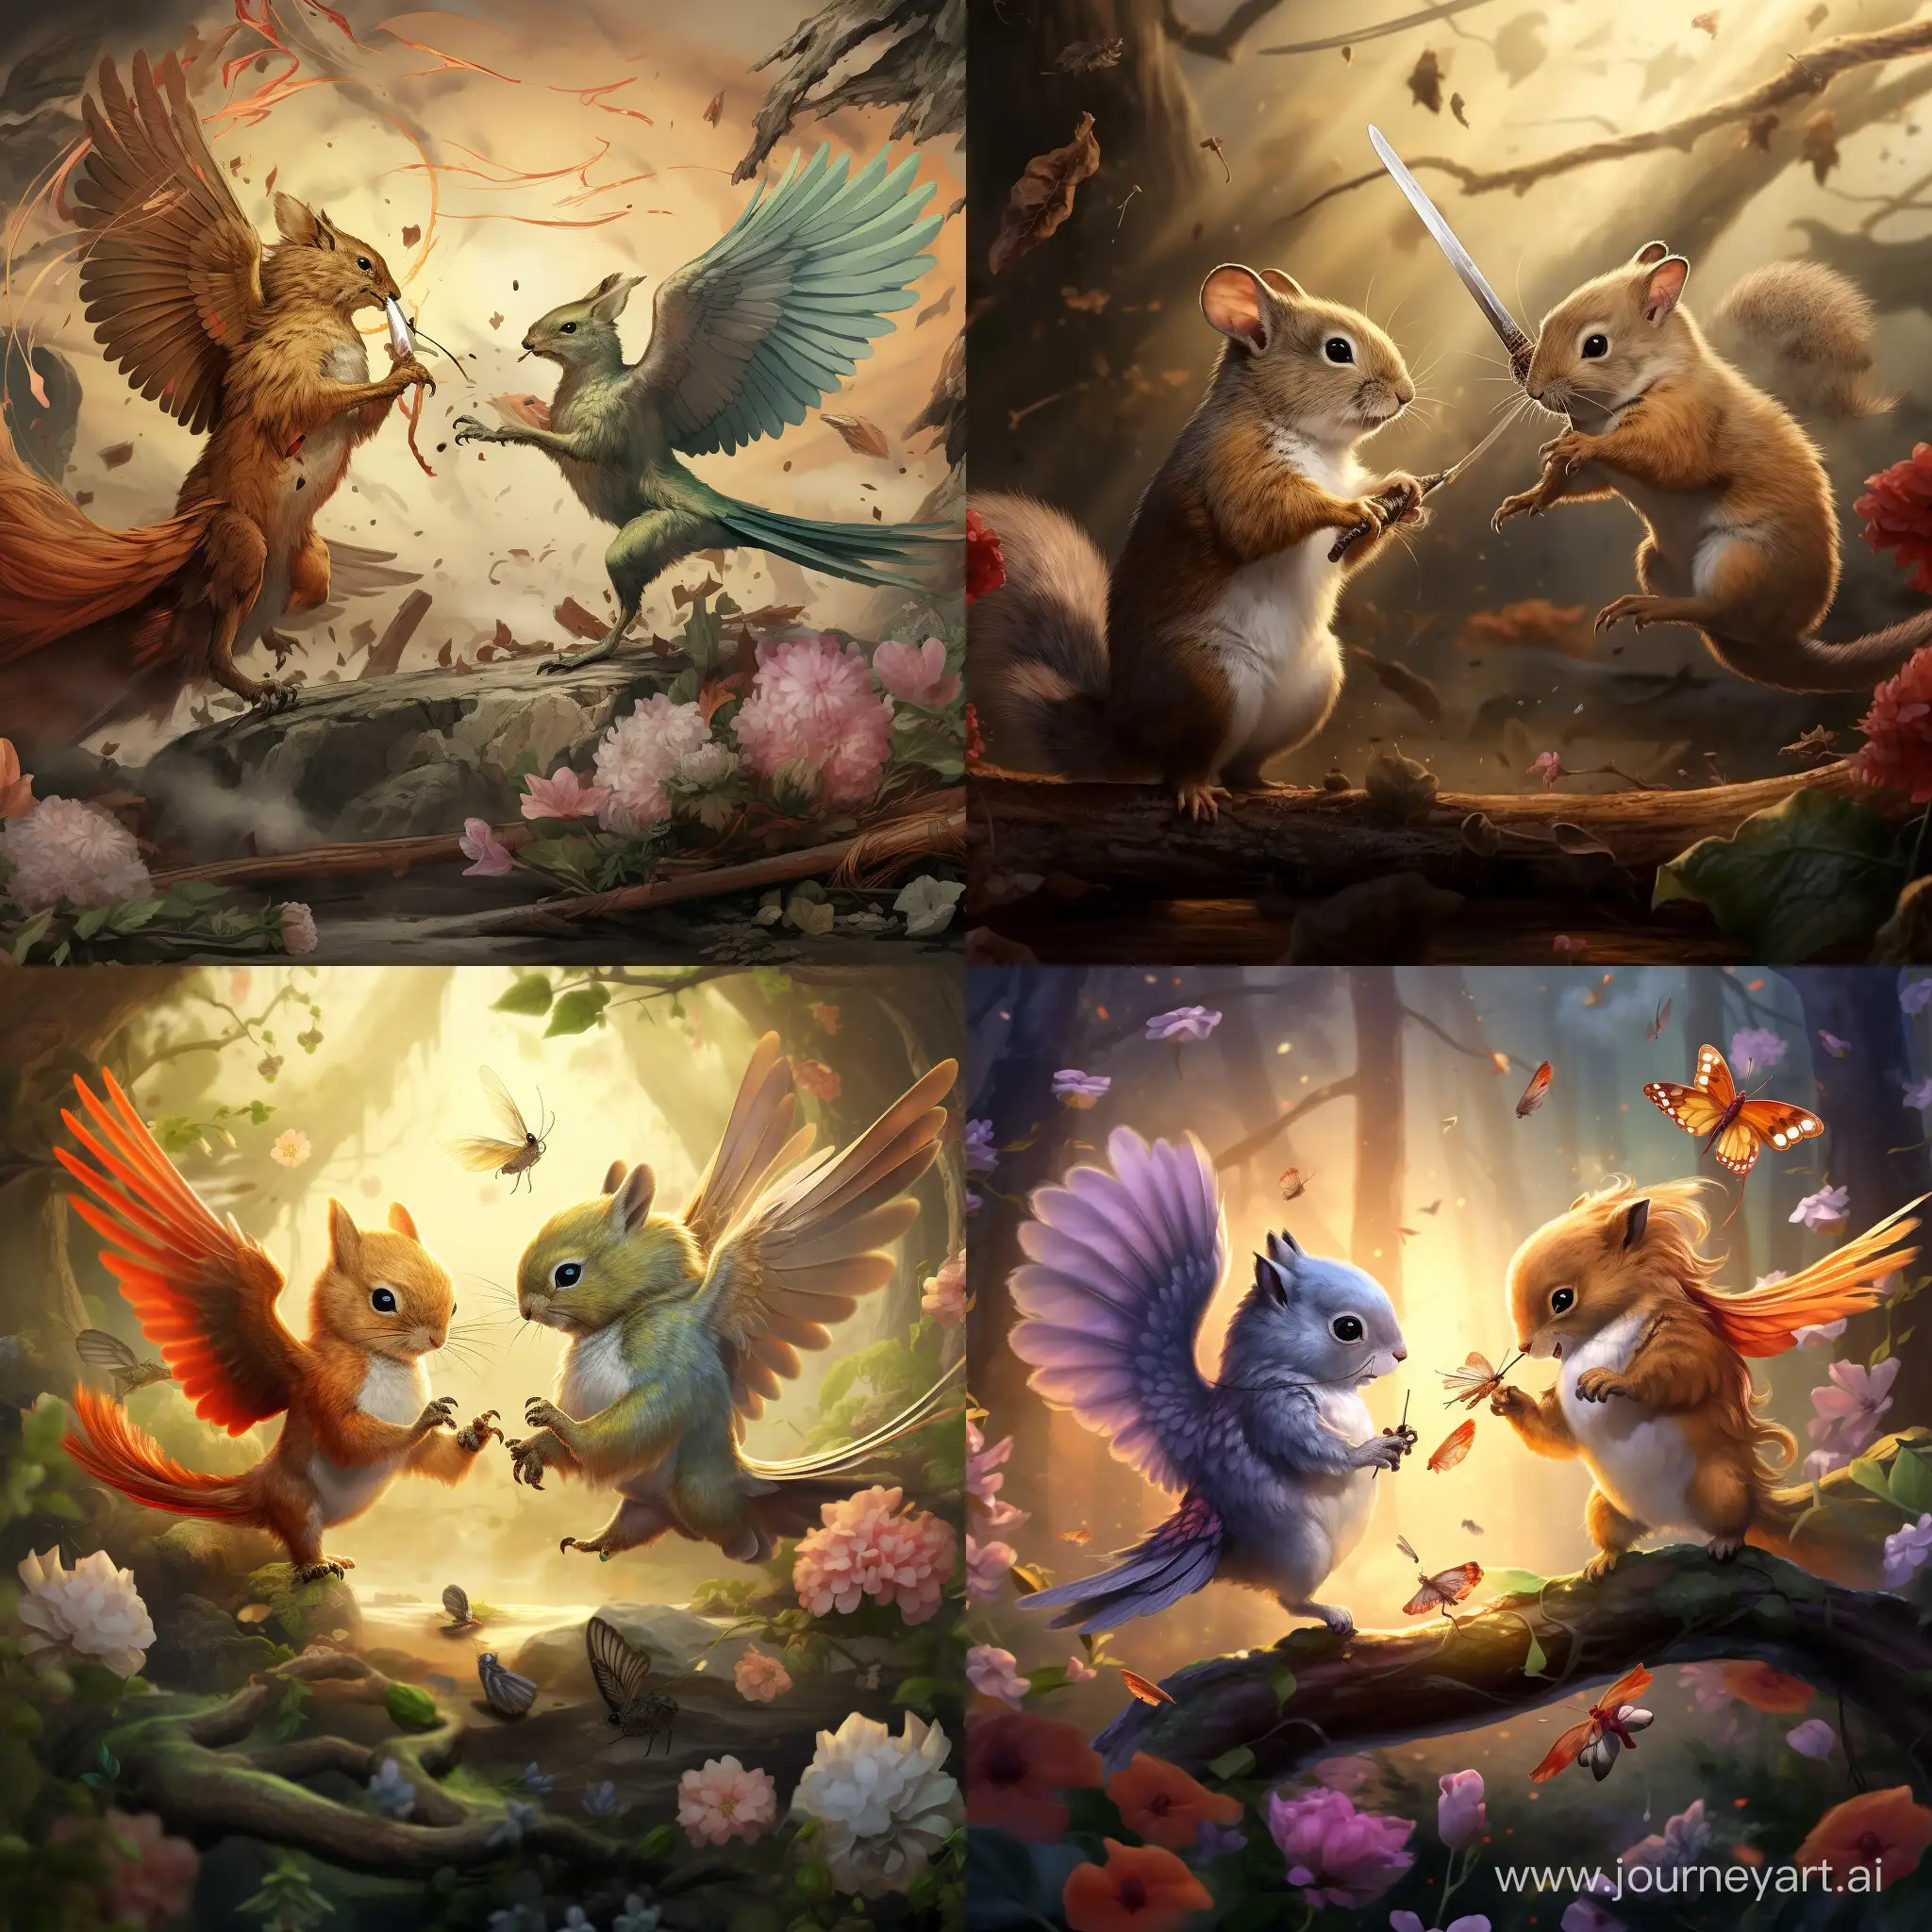 Epic-Anime-Battle-Squirrel-vs-Hummingbird-Clash-of-the-Furred-and-Feathered-Warriors